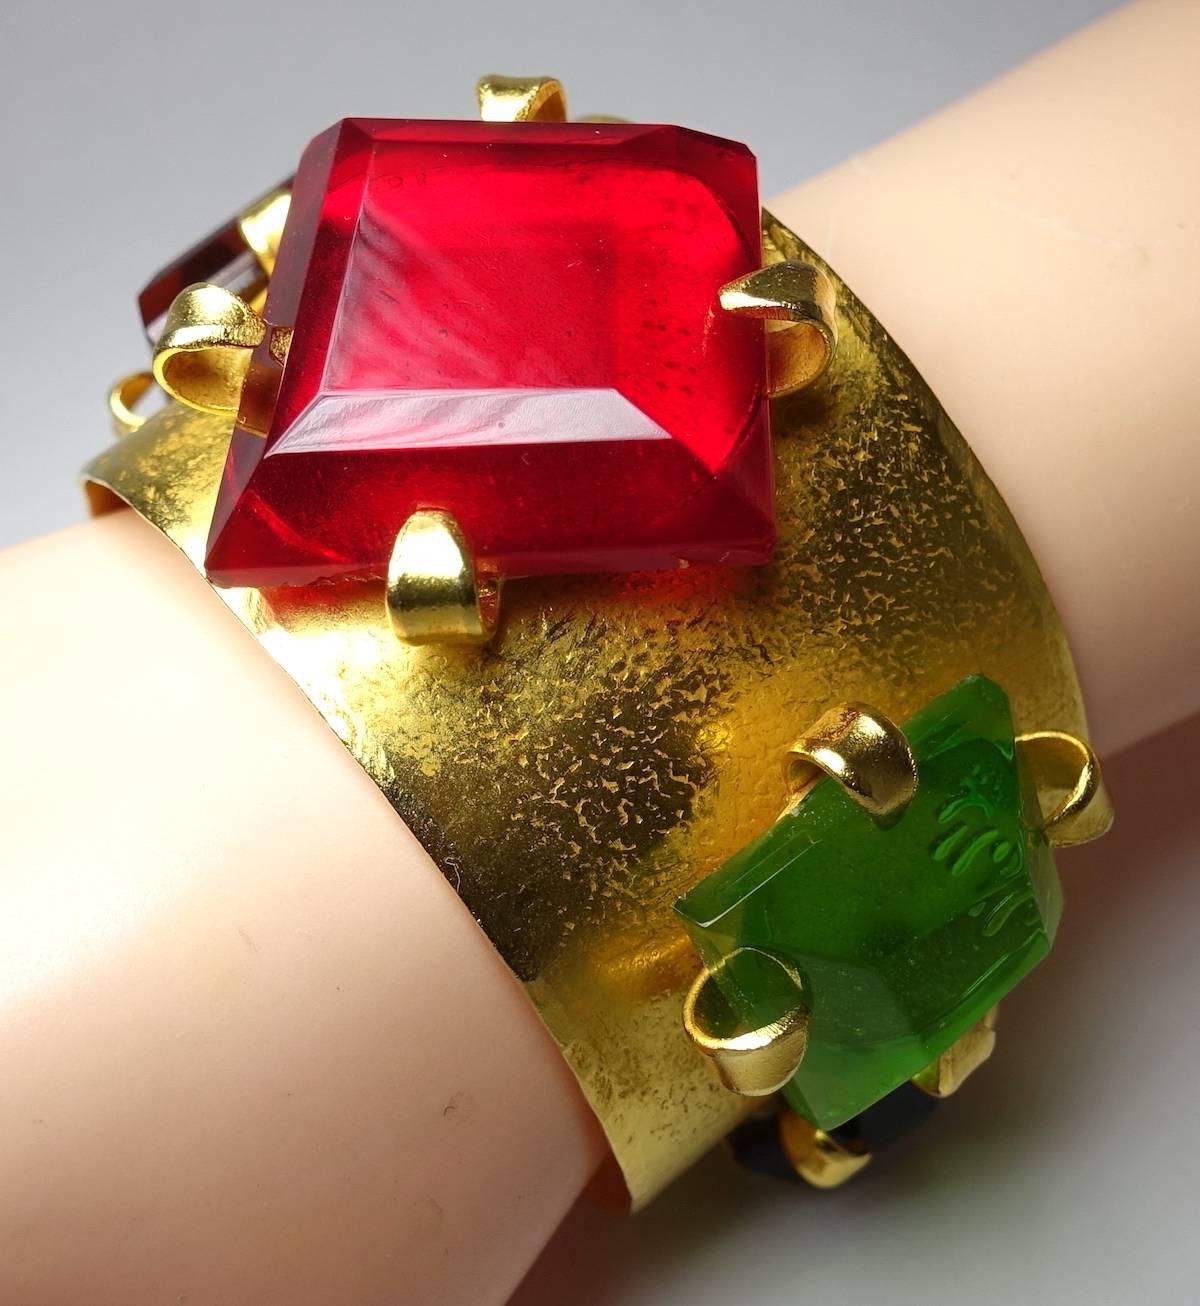 This gorgeous cuff by French designer Dominique Aurientis features large bezel cut glass tones in colors of garnet, amethyst, topaz, citrine & peridot, all in a textured gold tone setting.  This cuff measures 7-1/2” x 1-5/8” and is signed “Dominique